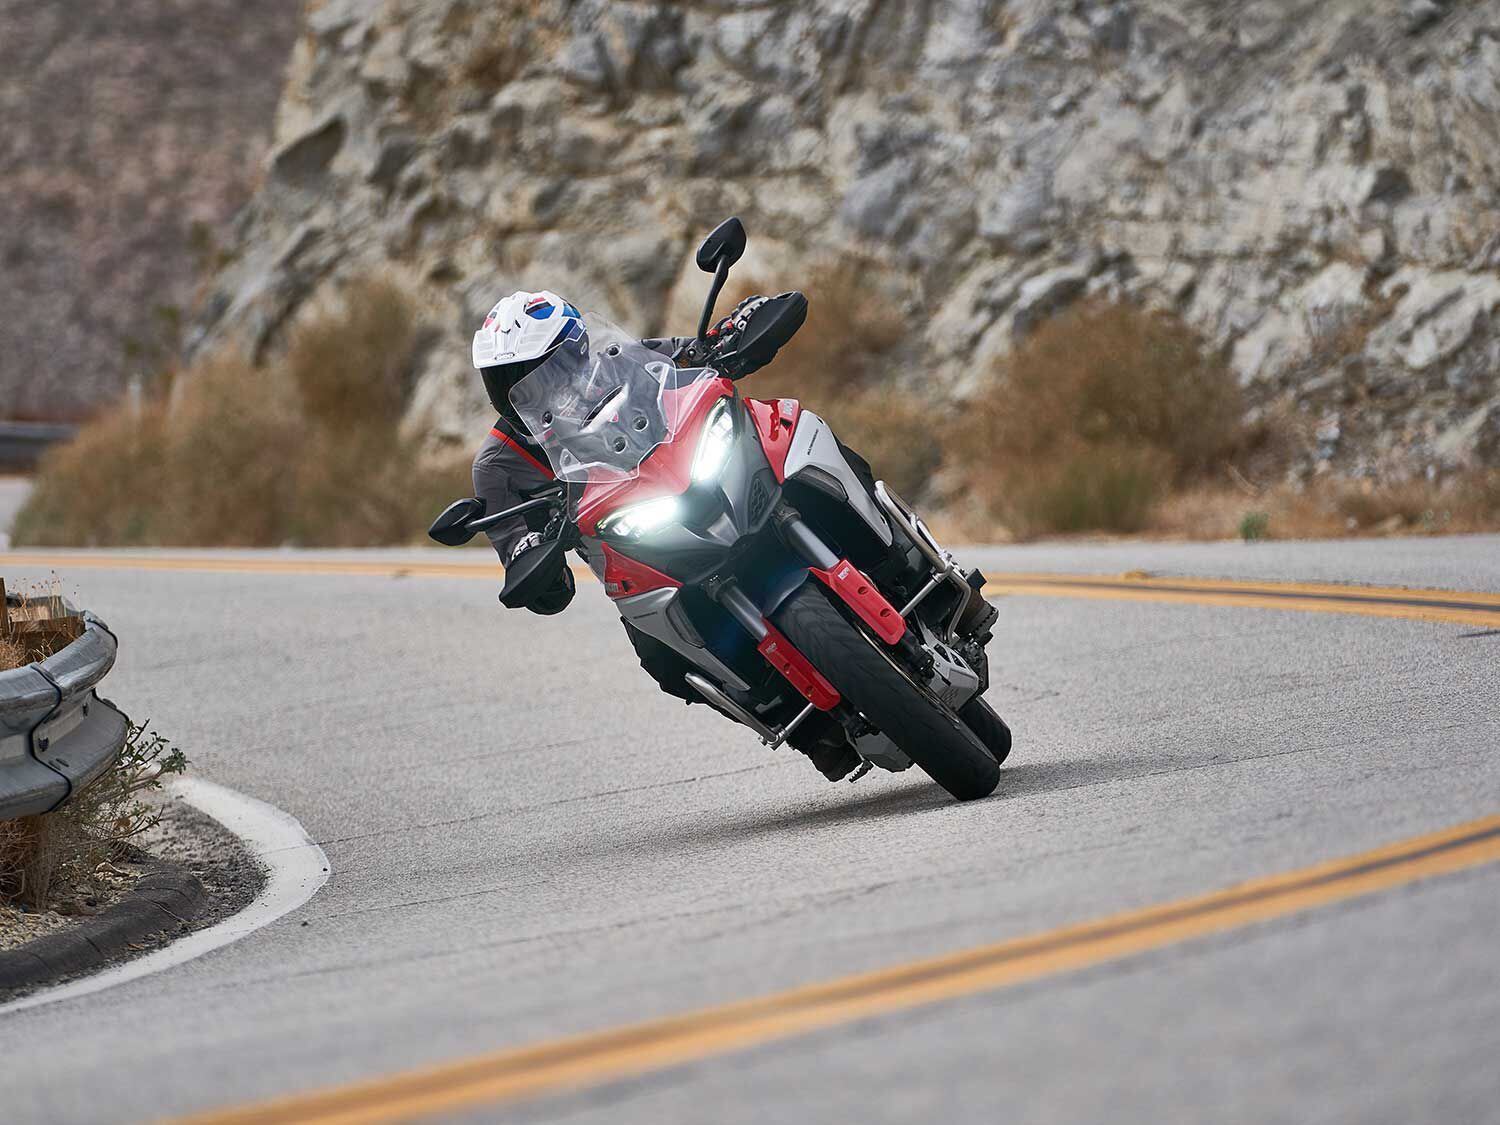 Touring is way more entertaining aboard the 2021 Ducati Multistrada V4 S. It’s as rich in character as it is fast, and a worthy option for sport-minded adventure riders.